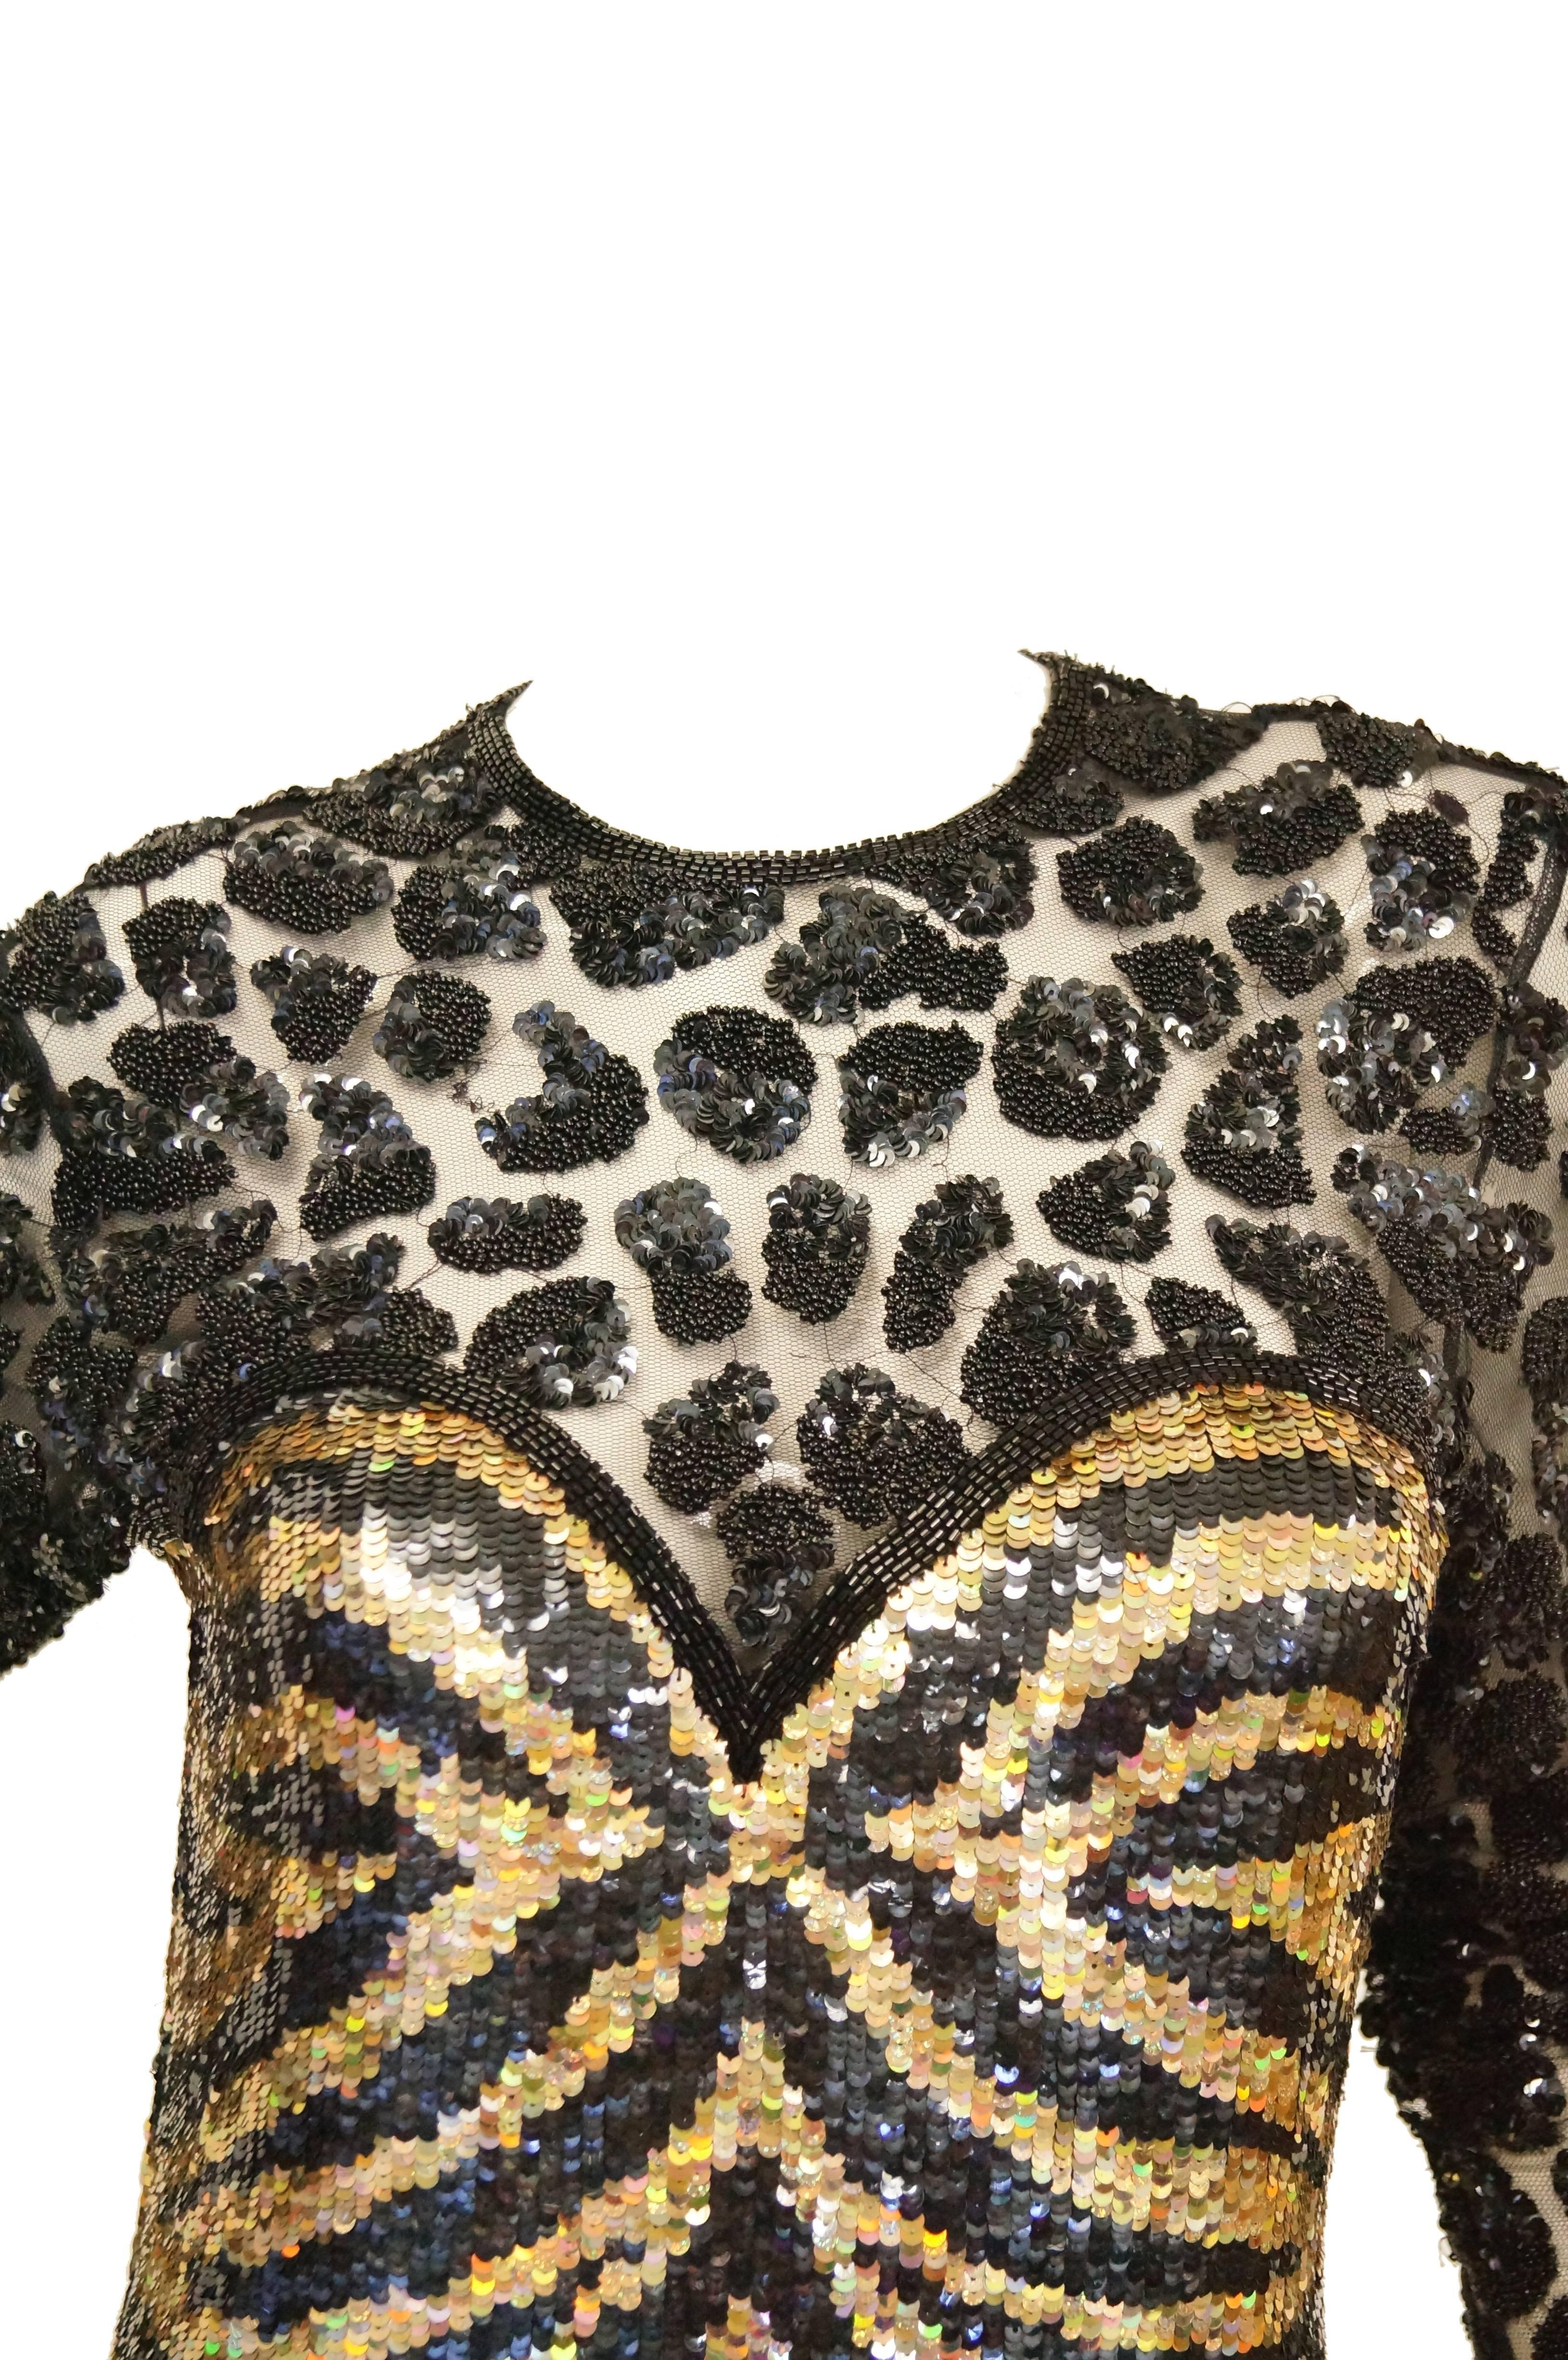 Outrageous Naeem Khan Riazee tiger and cheetah cocktail dress. The dress is form fitting, with a sequin tiger body and sweetheart illusion neckline. The illusion neckline is composed of sheer fabric accented by black cheetah spots. The tiger stripes